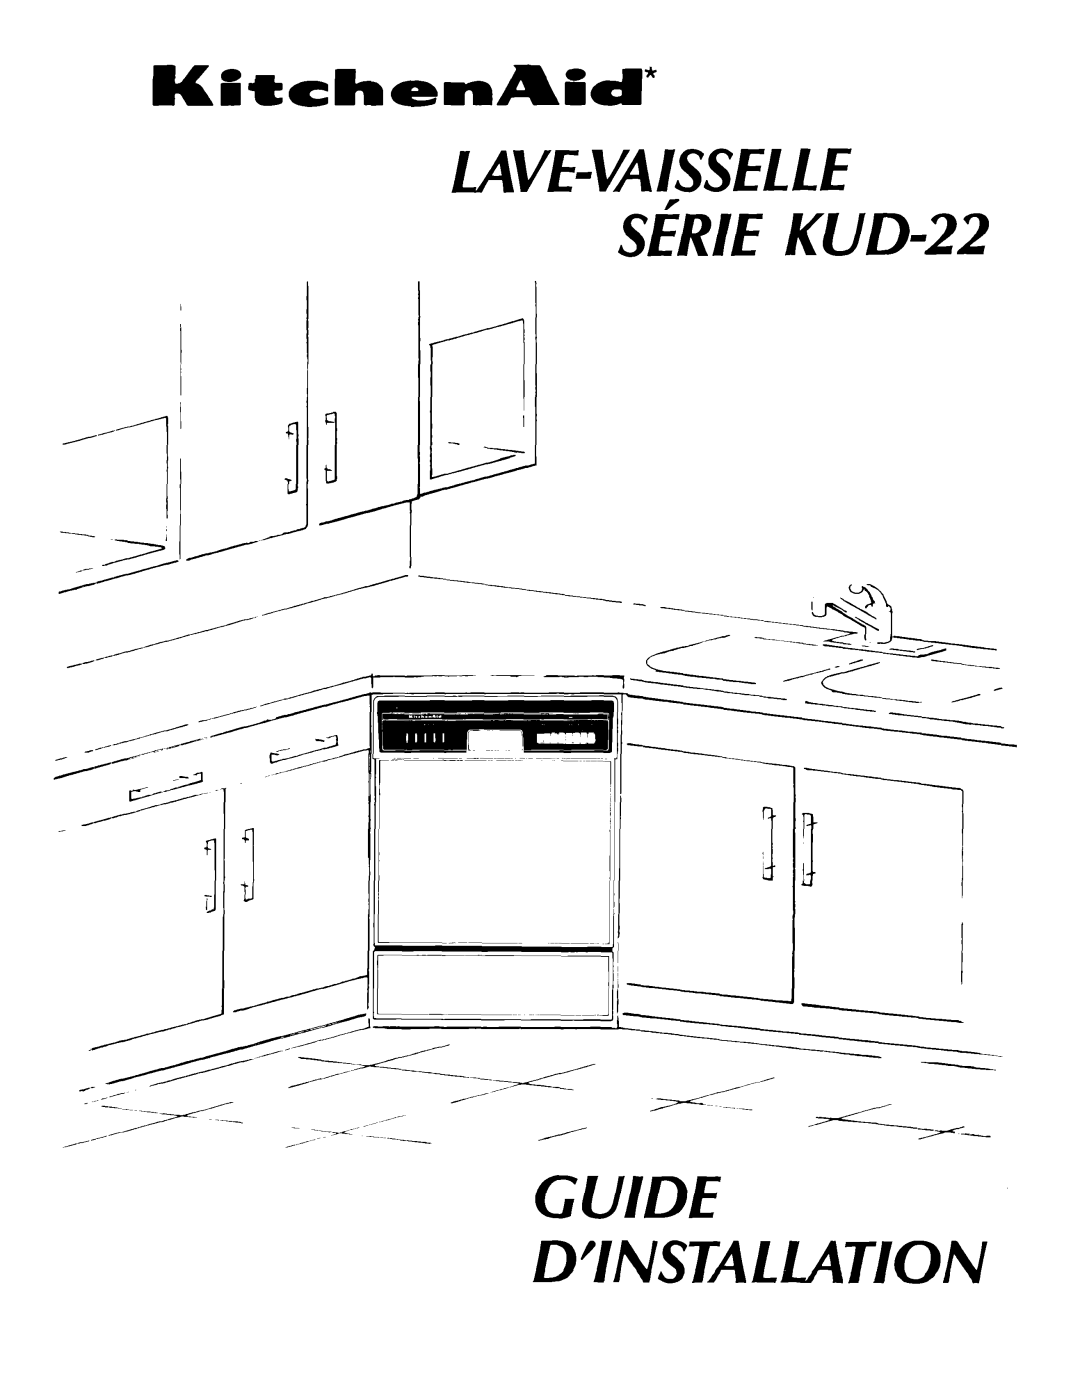 KitchenAid manual L/WE-VAISSELLE SiRlE KUD-22, UiechenACd, Guide D/Installation, A--- 3 7’ 11 l 